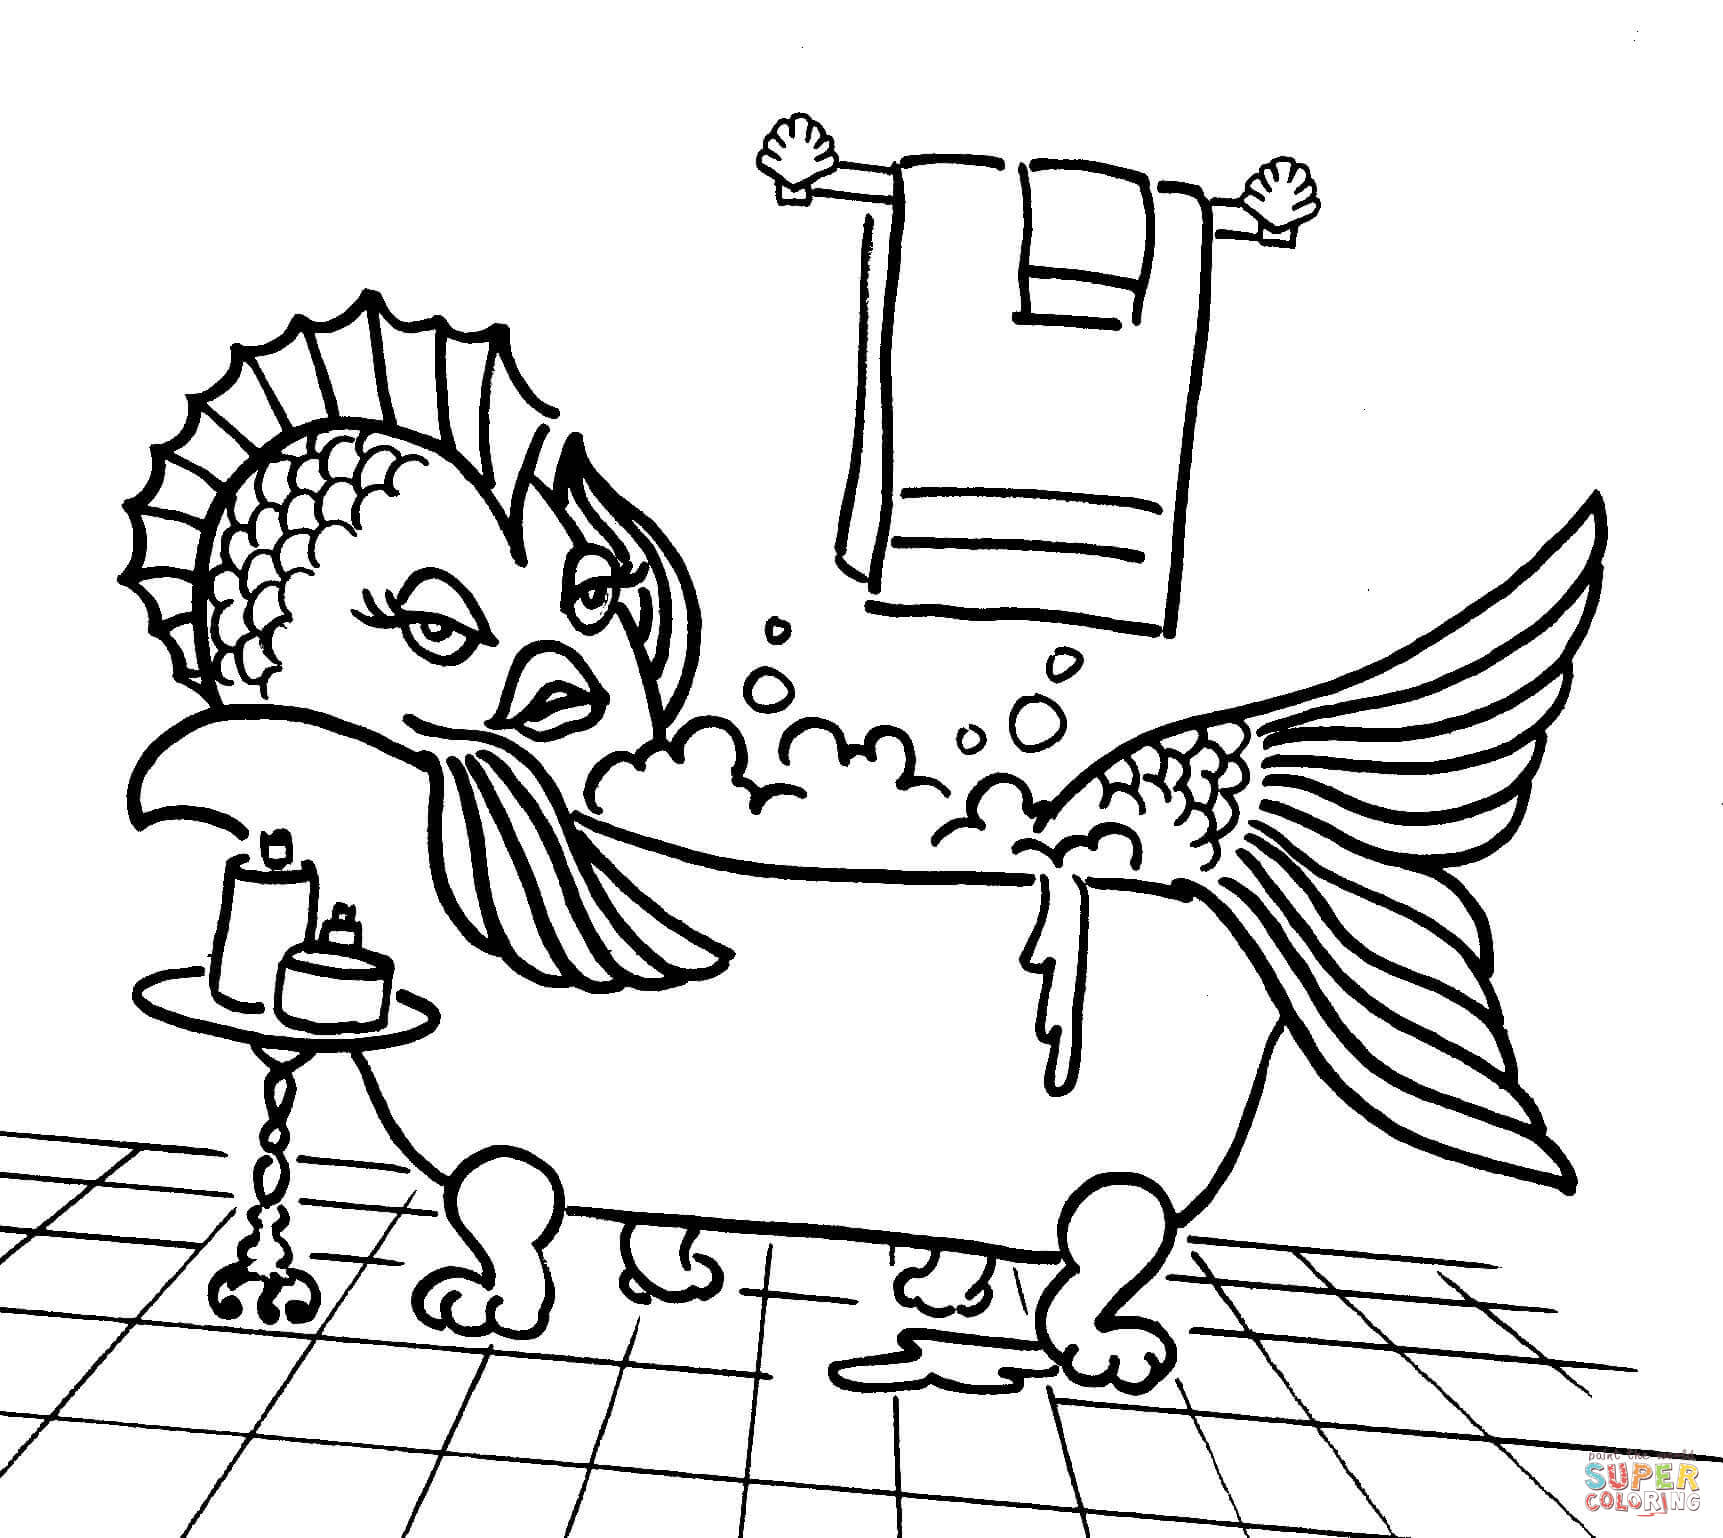 Cartoon Fish in the Tub coloring page | Free Printable Coloring Pages